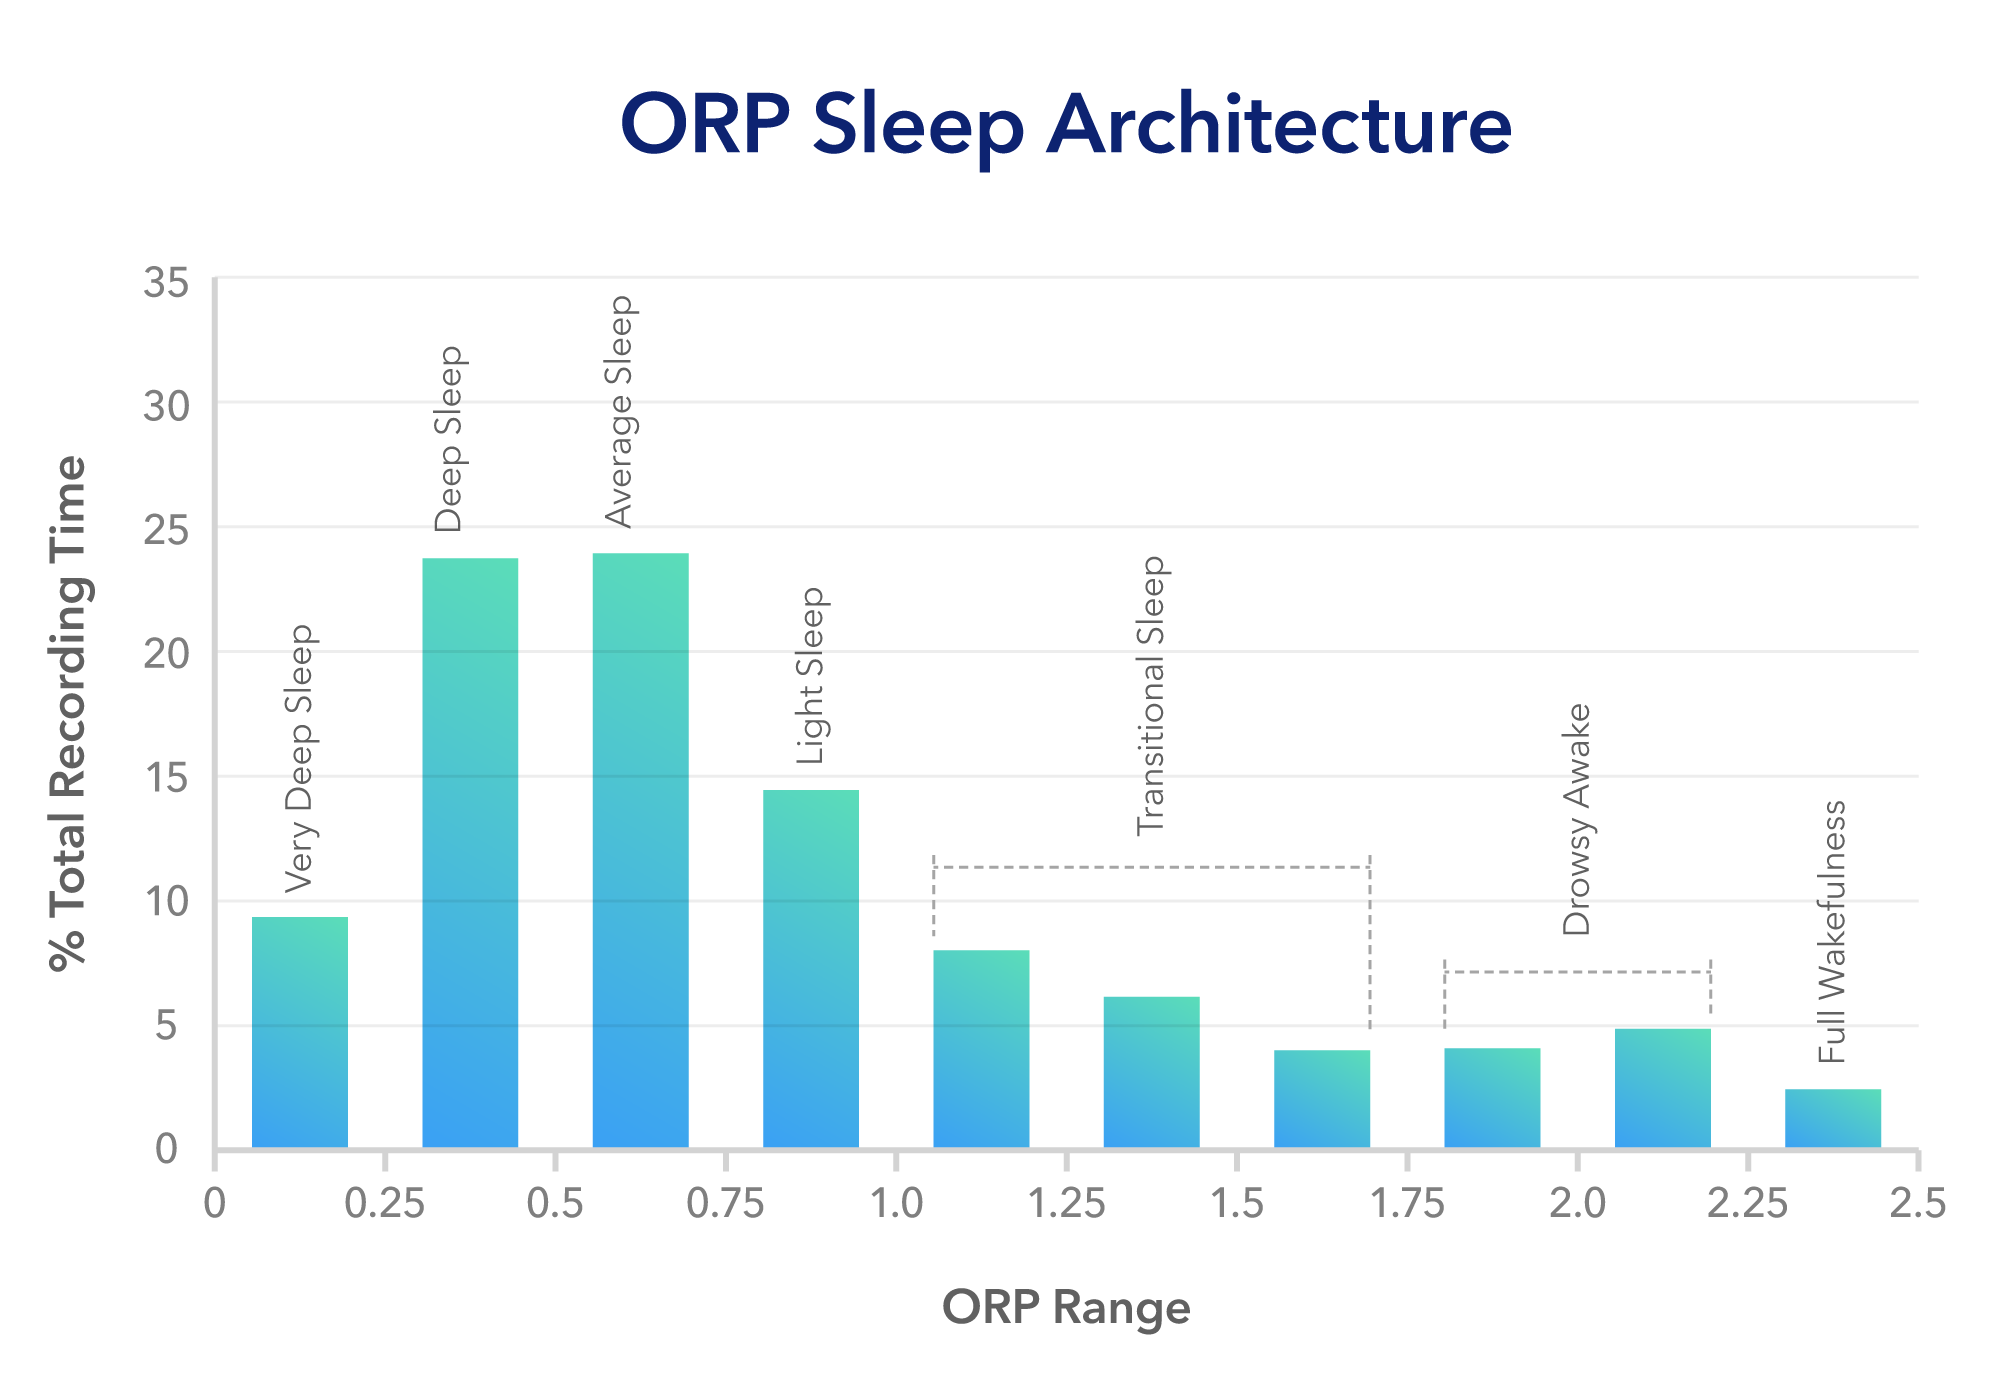 20028-CRB-Chart-01-ORPSleepArchitecture-REV2 (1)